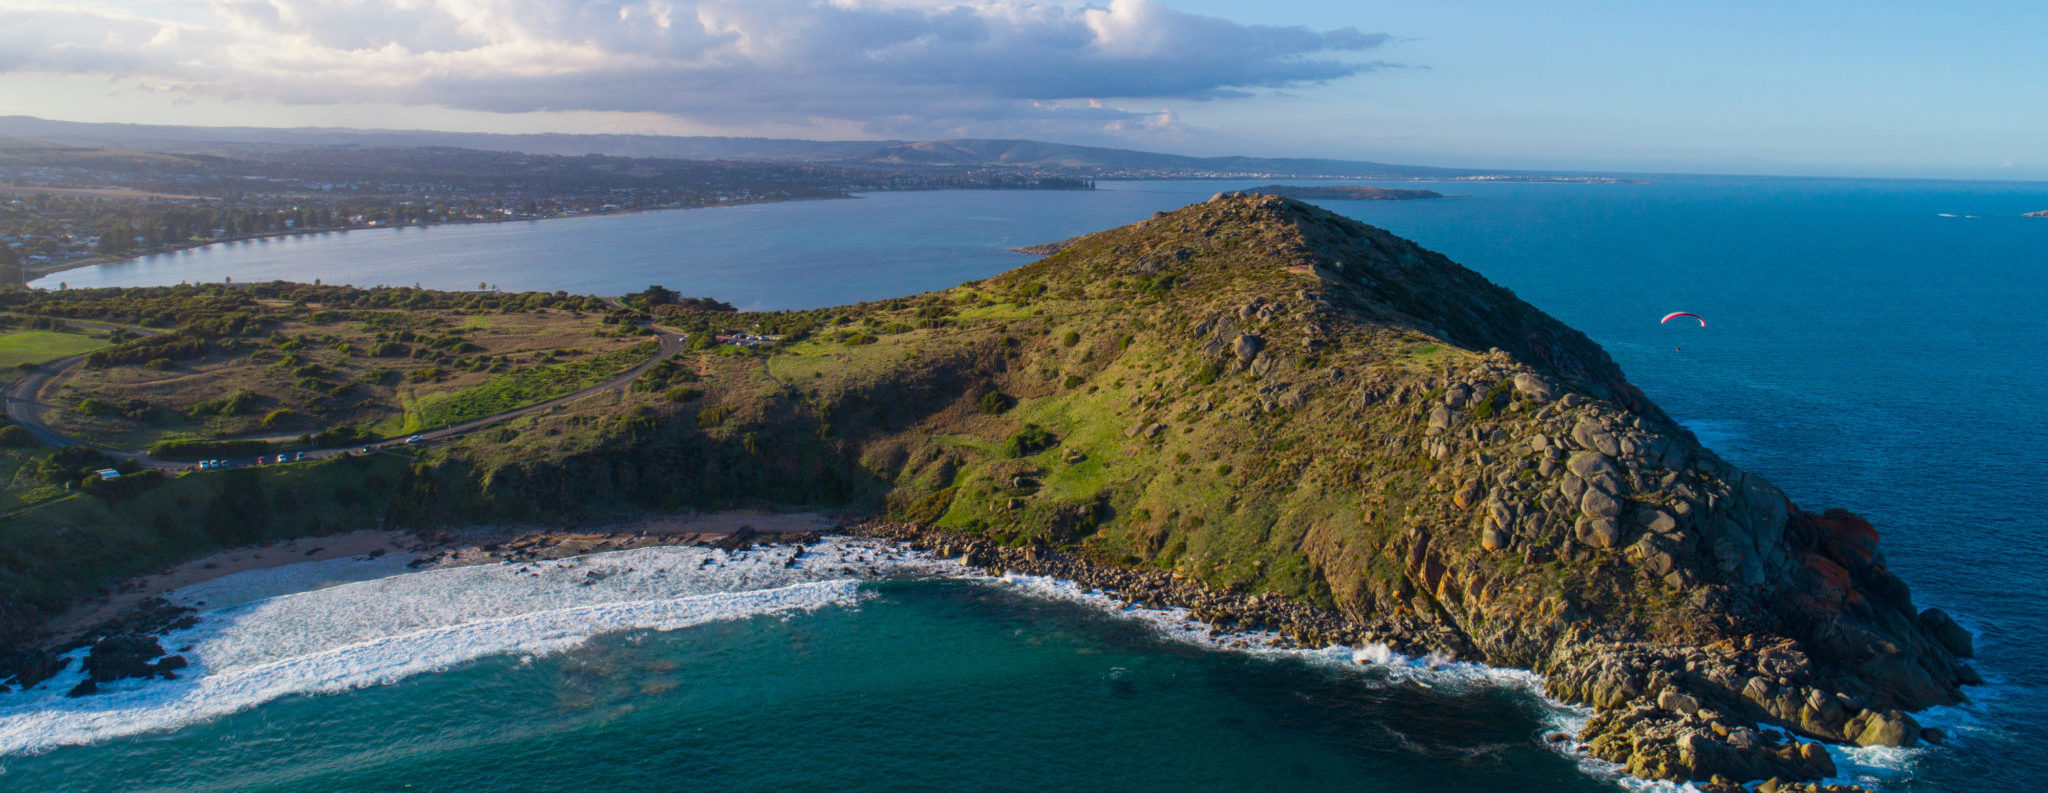 View from the air of The Bluff in Encounter Bay.